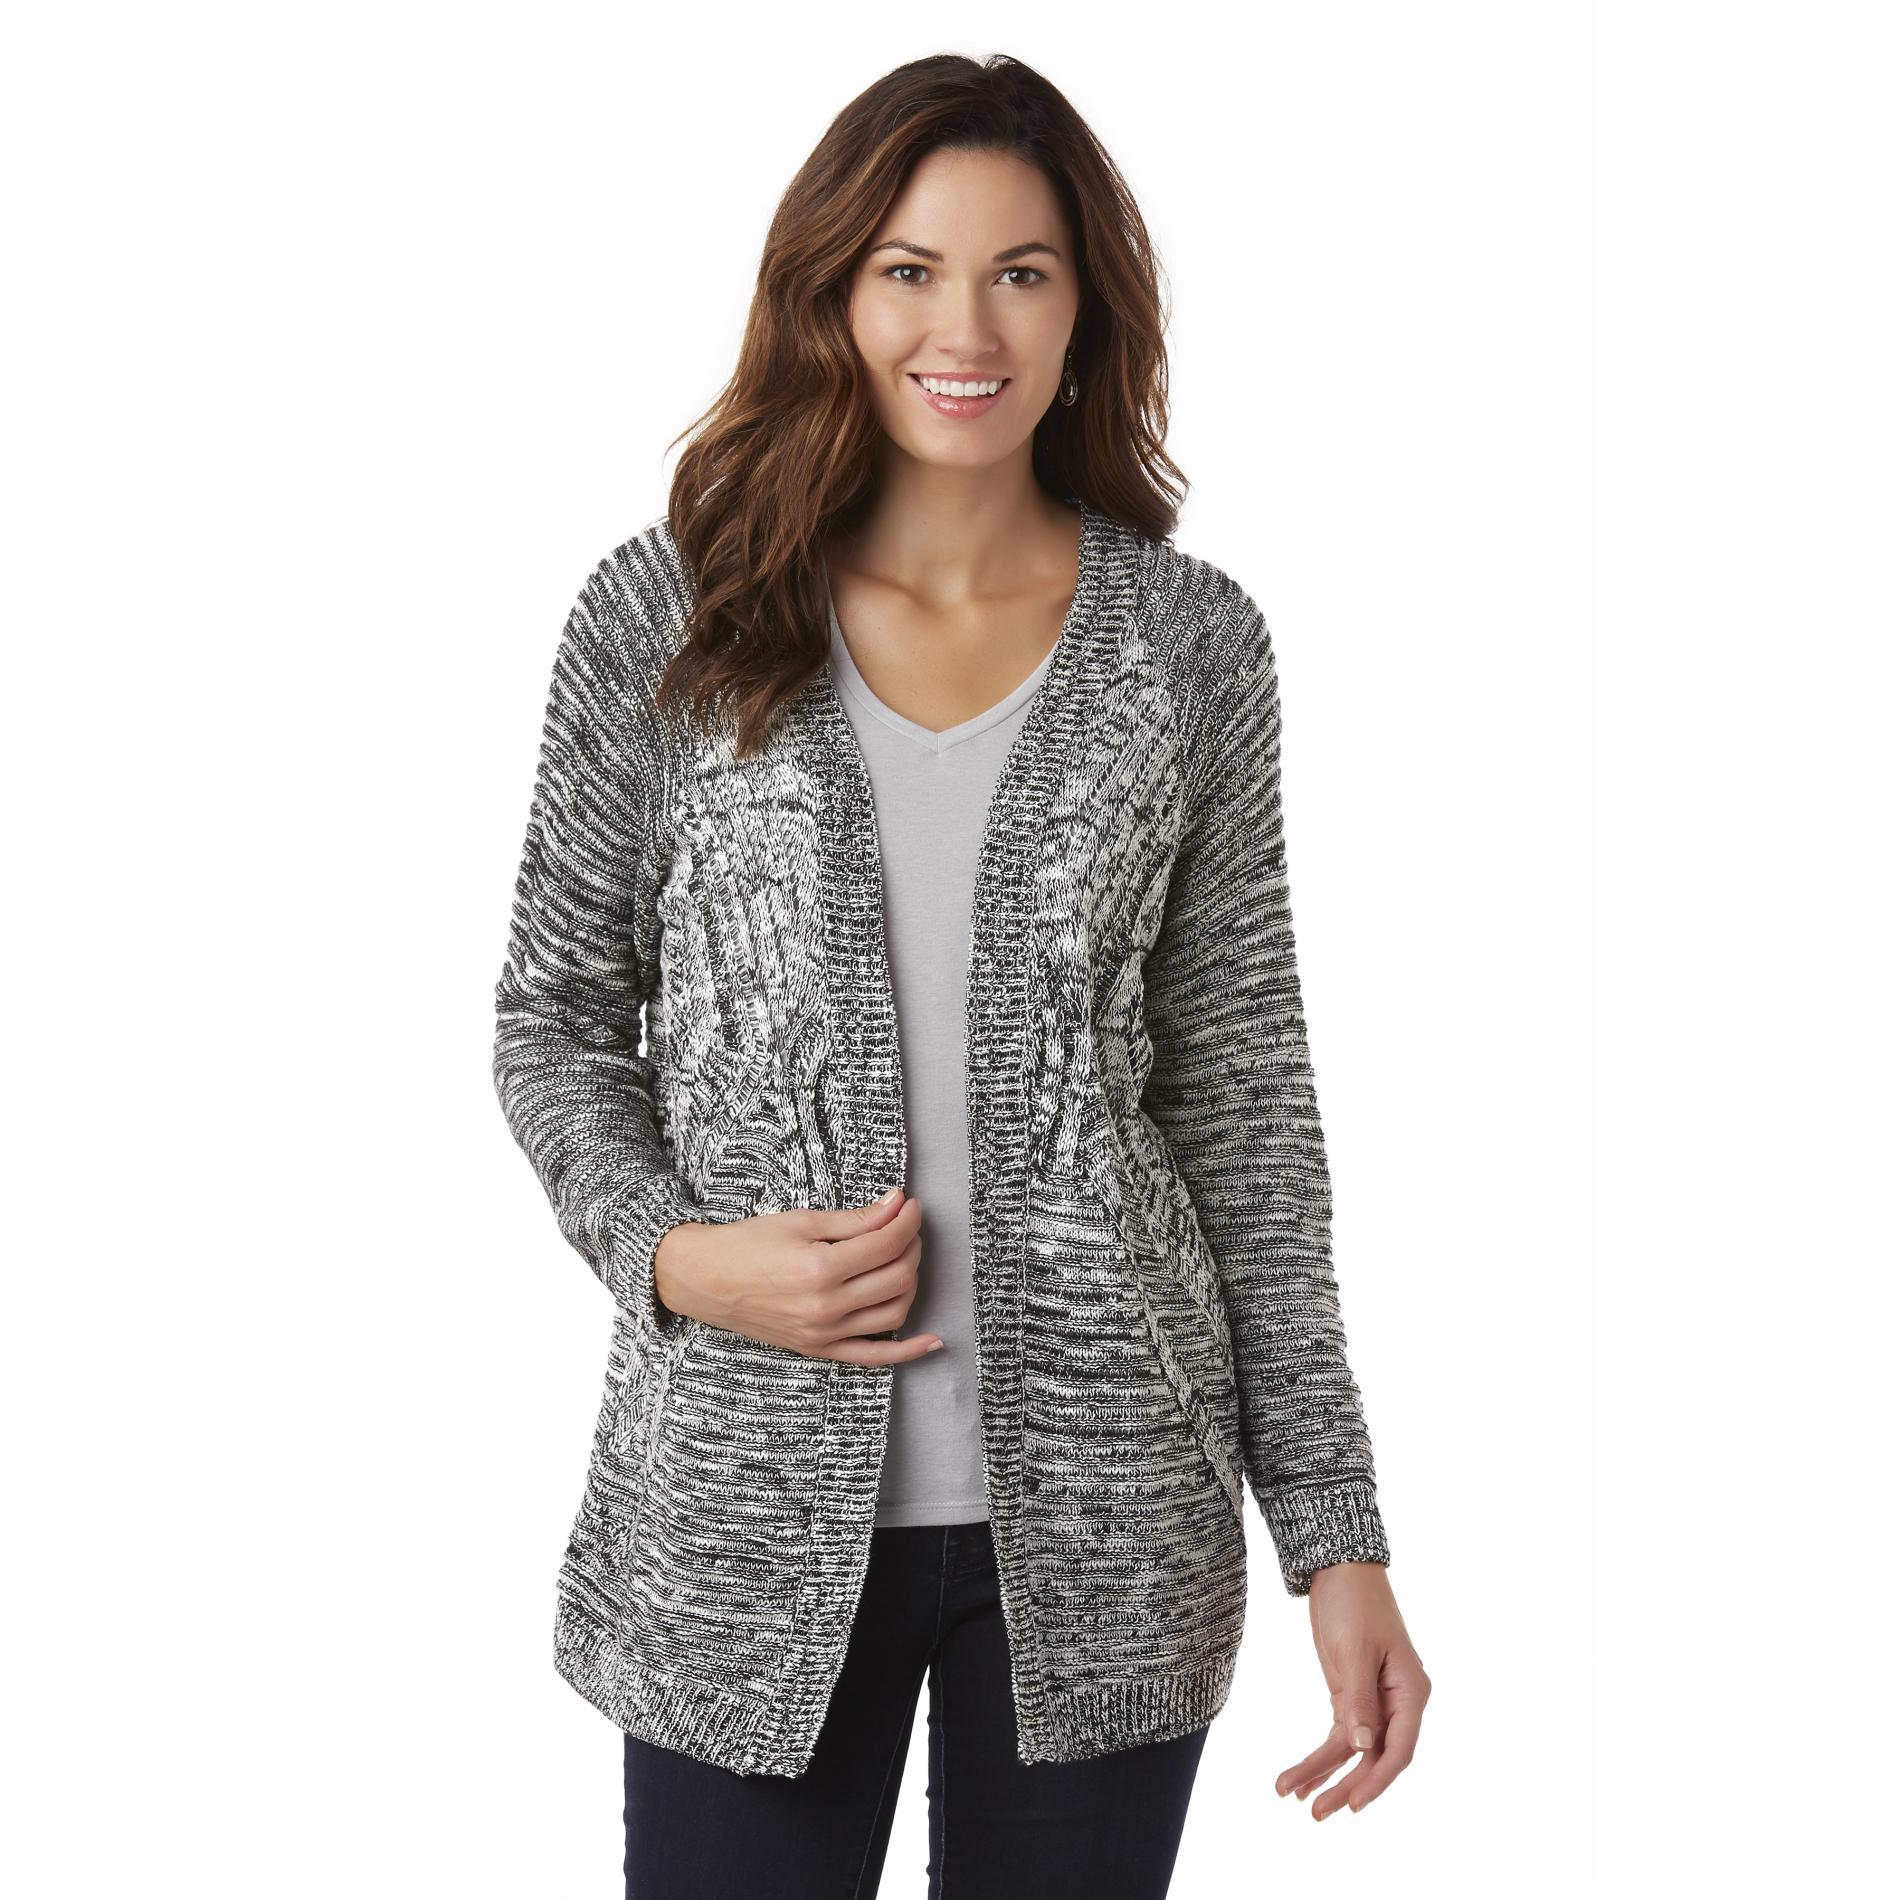 Canyon River Blues Women's Open-Front Cardigan - Marled